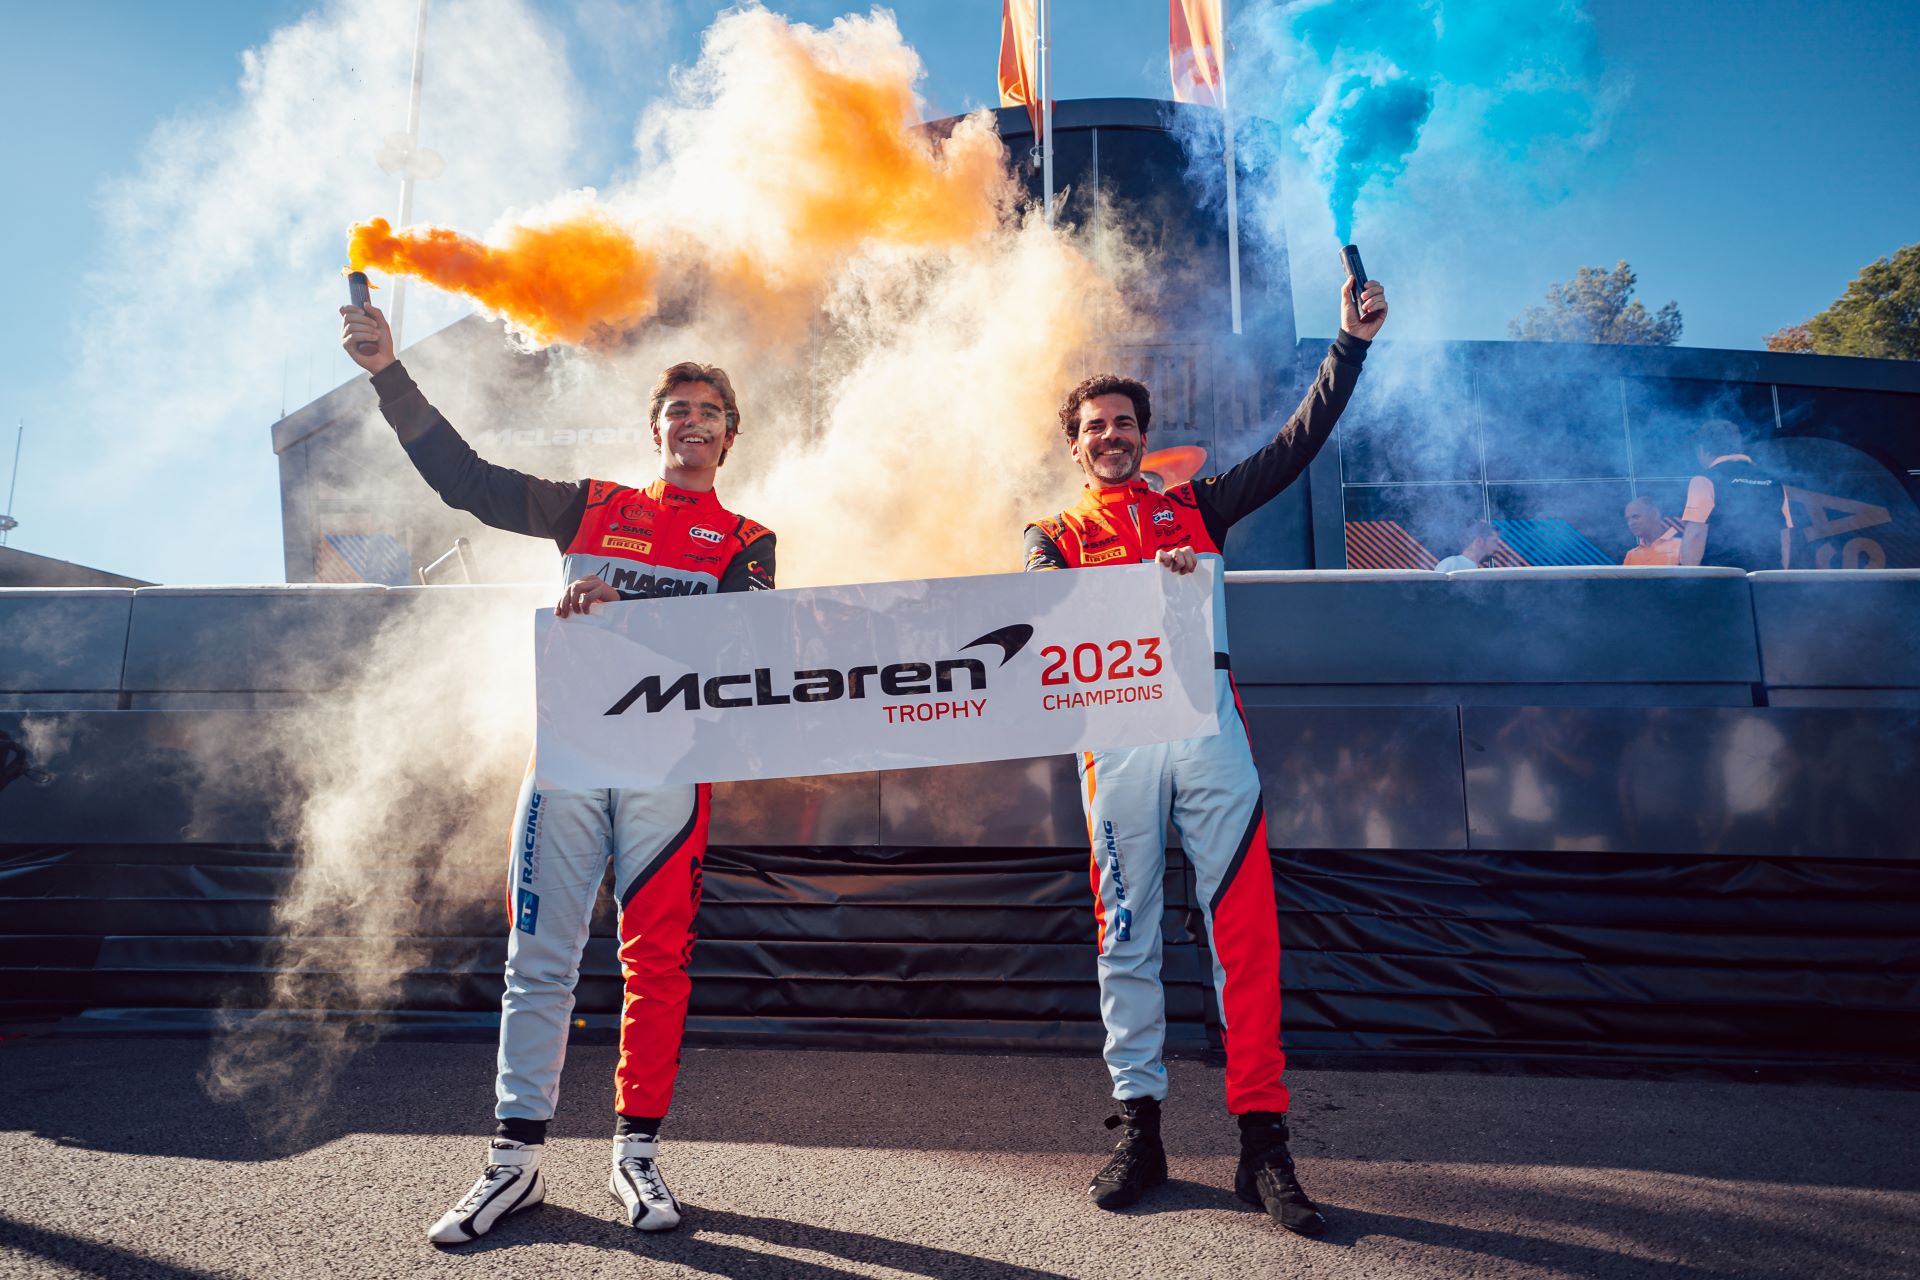 Gonzalo De Andres And Tomas Pintos Are Inaugural Mclaren Trophy Champions